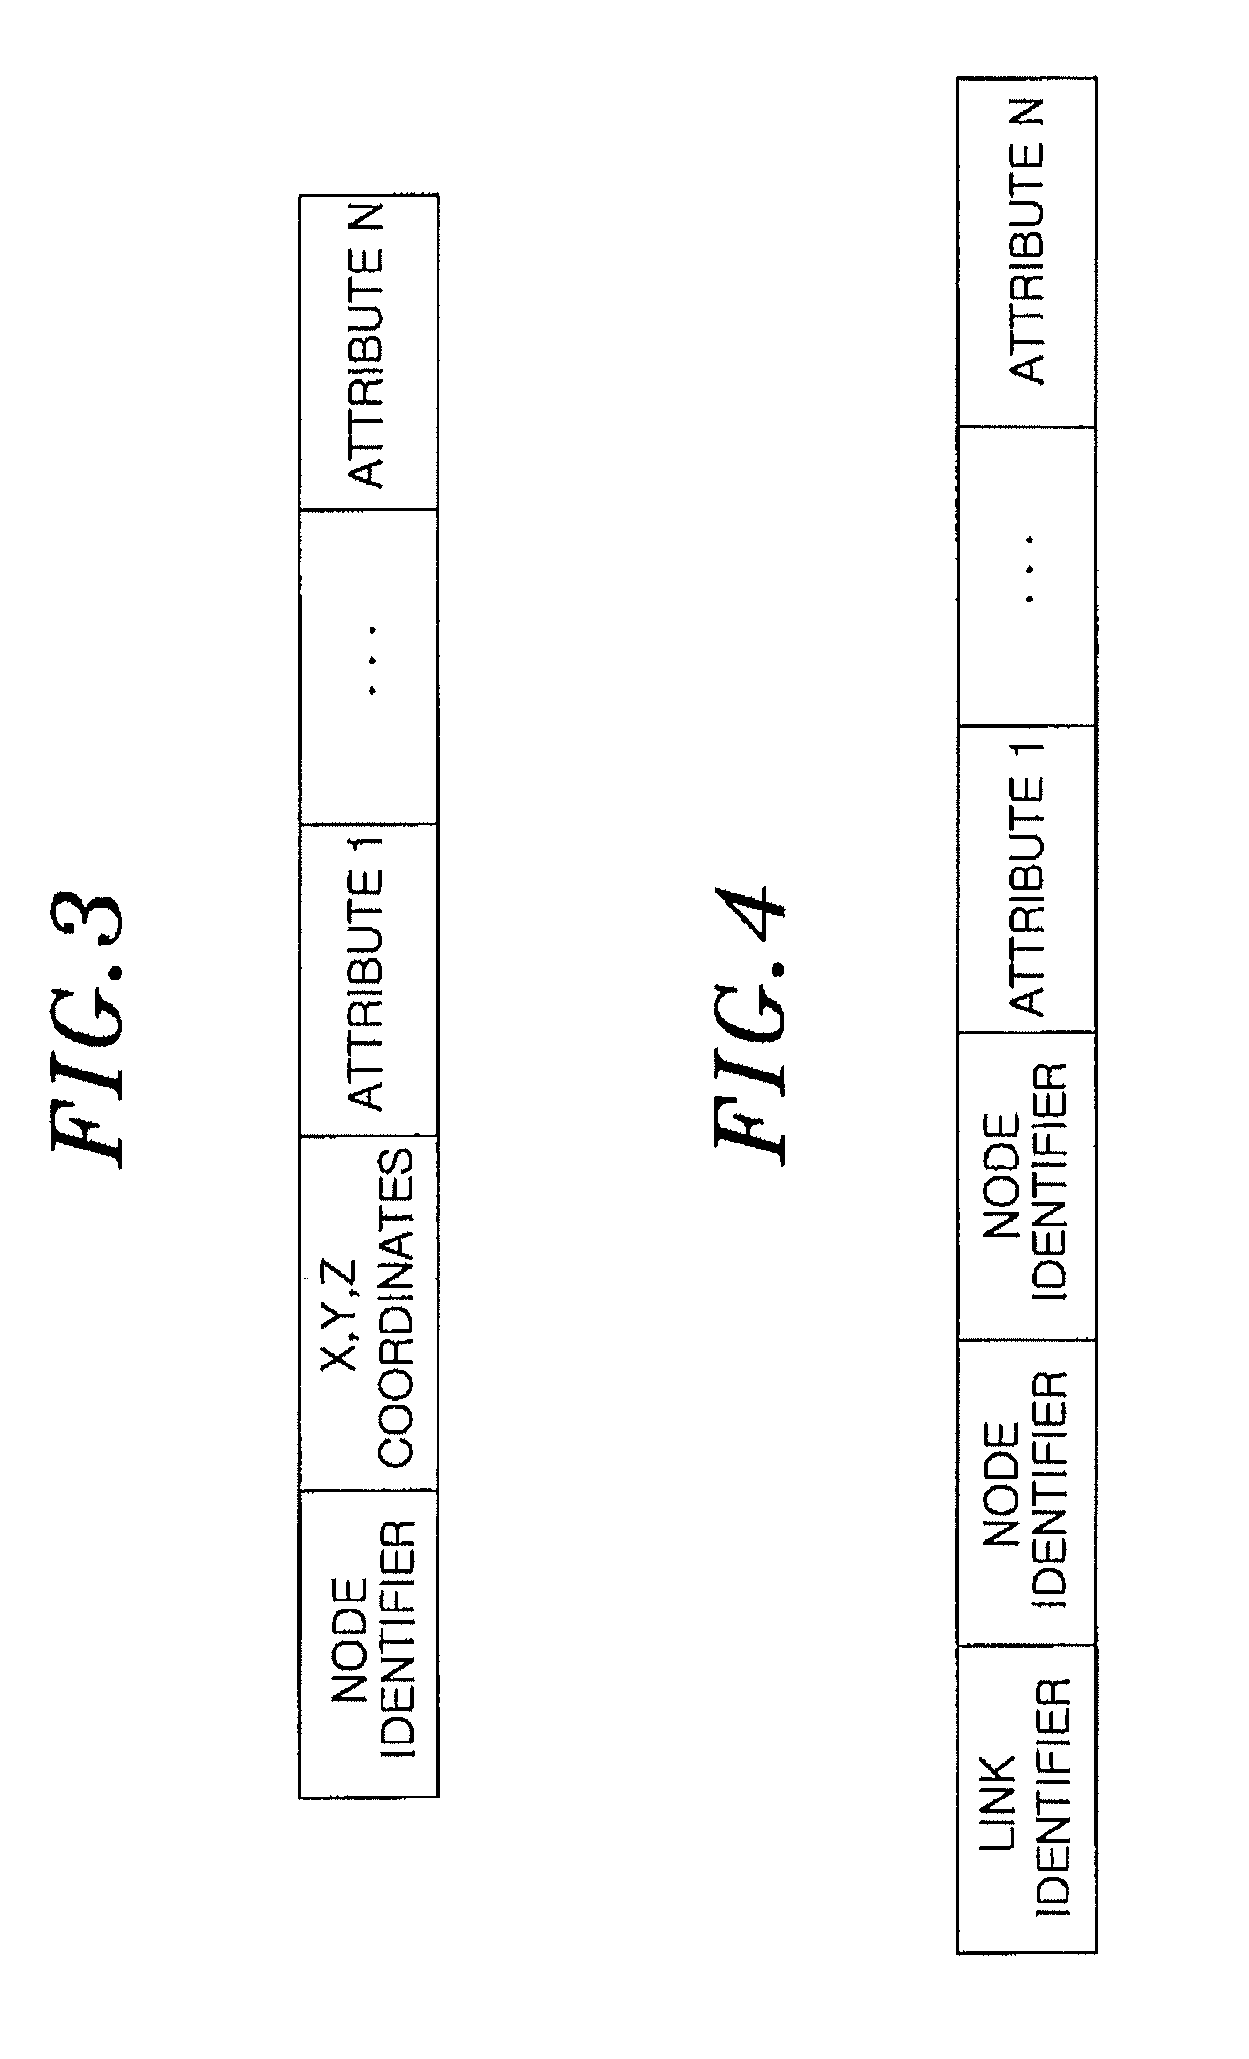 Cell-based vehicle driving control method and system